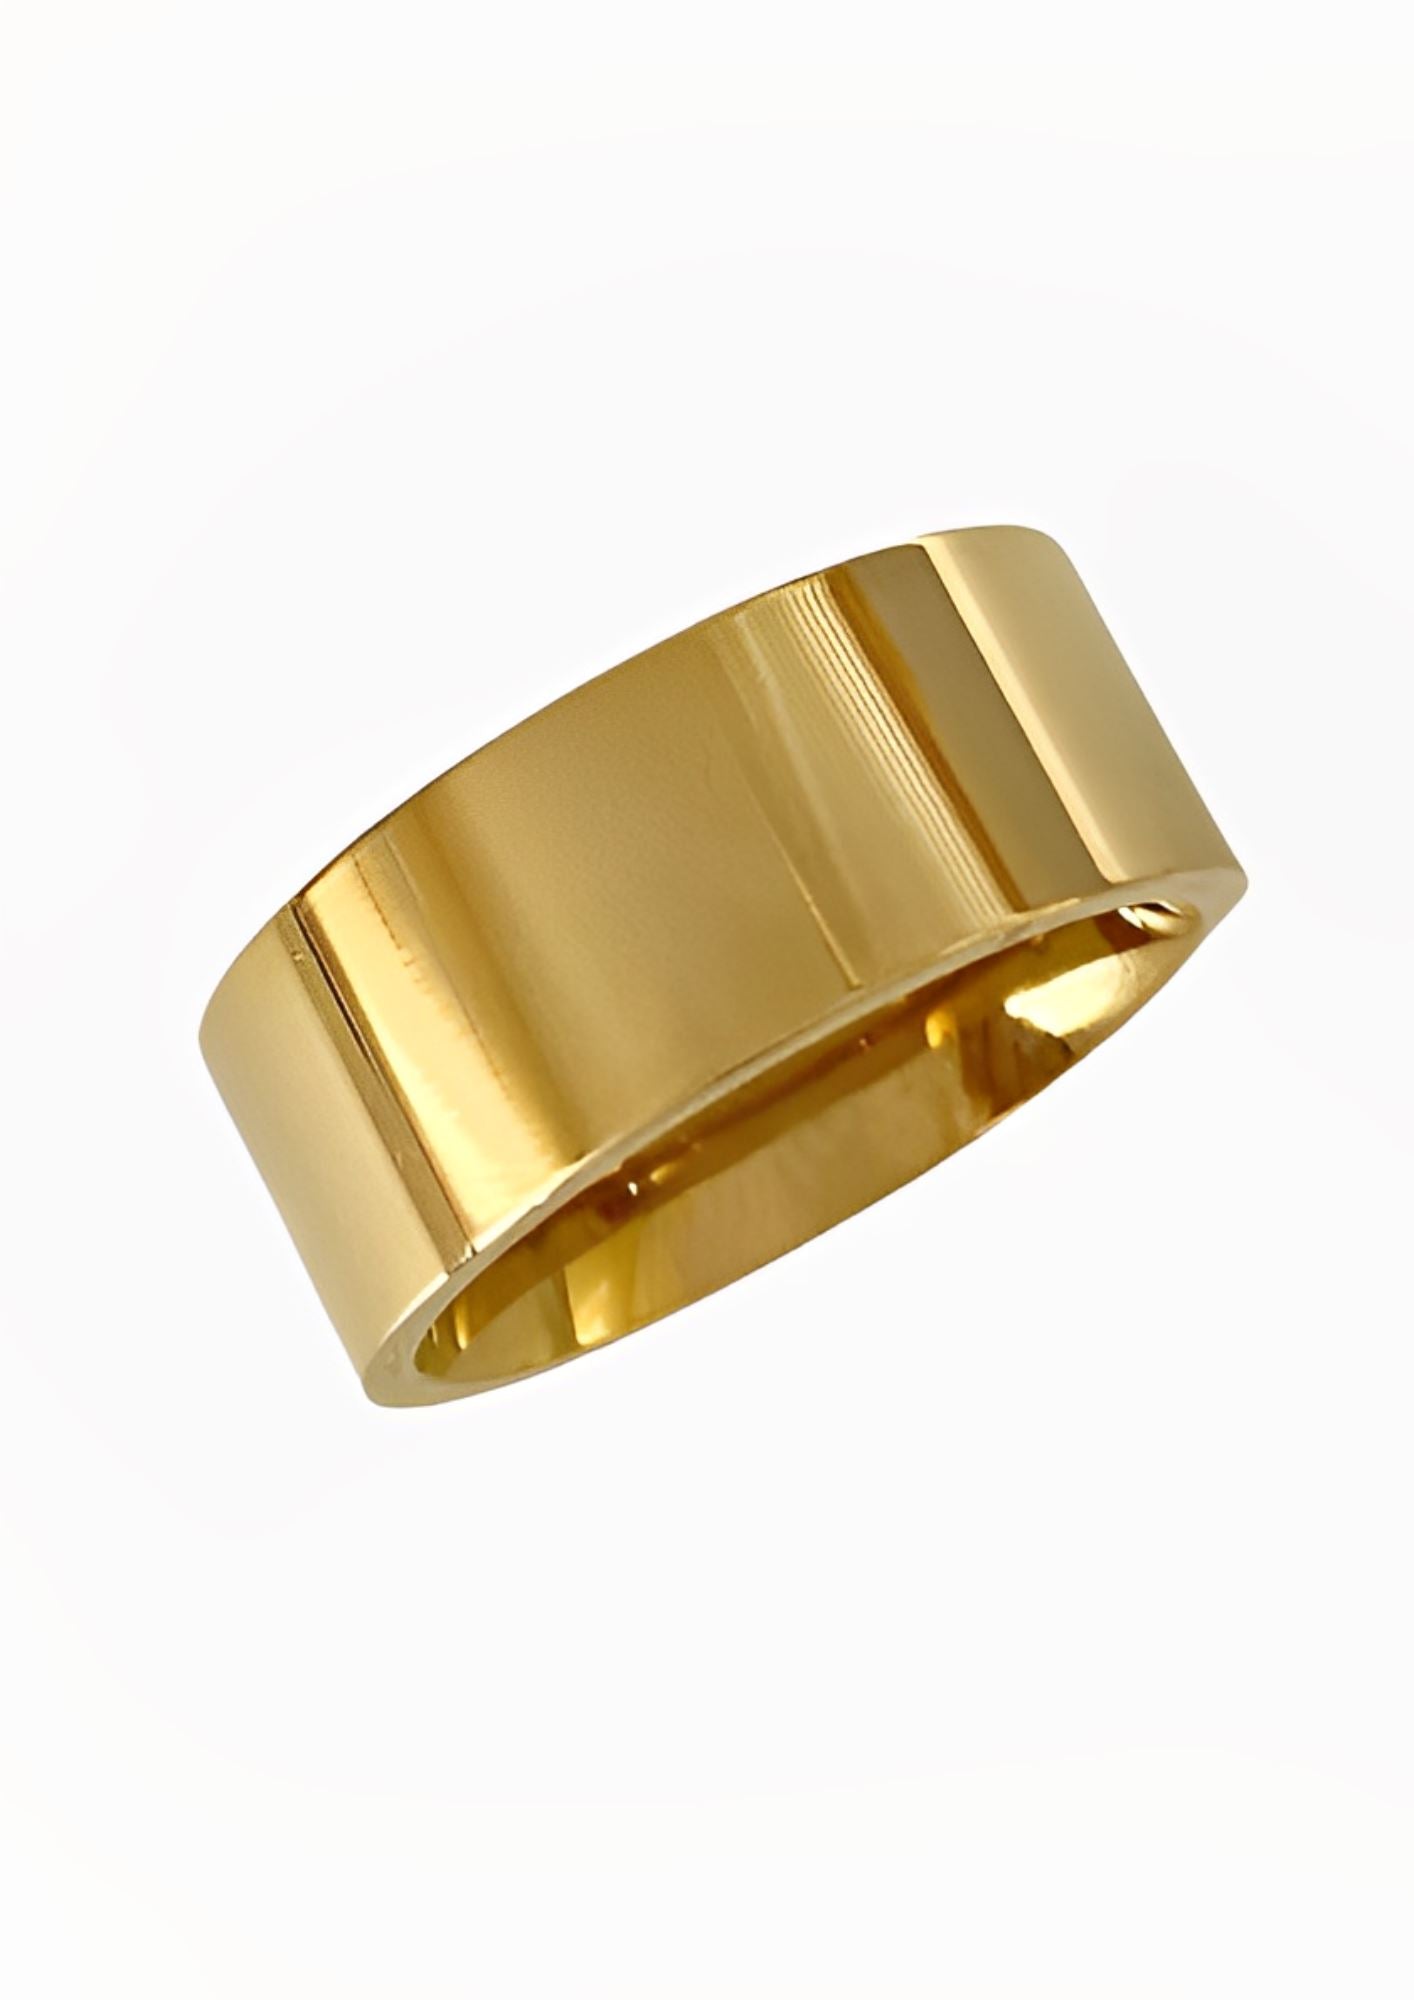 ZANE RING ring Yubama Jewelry Online Store - The Elegant Designs of Gold and Silver ! 7 